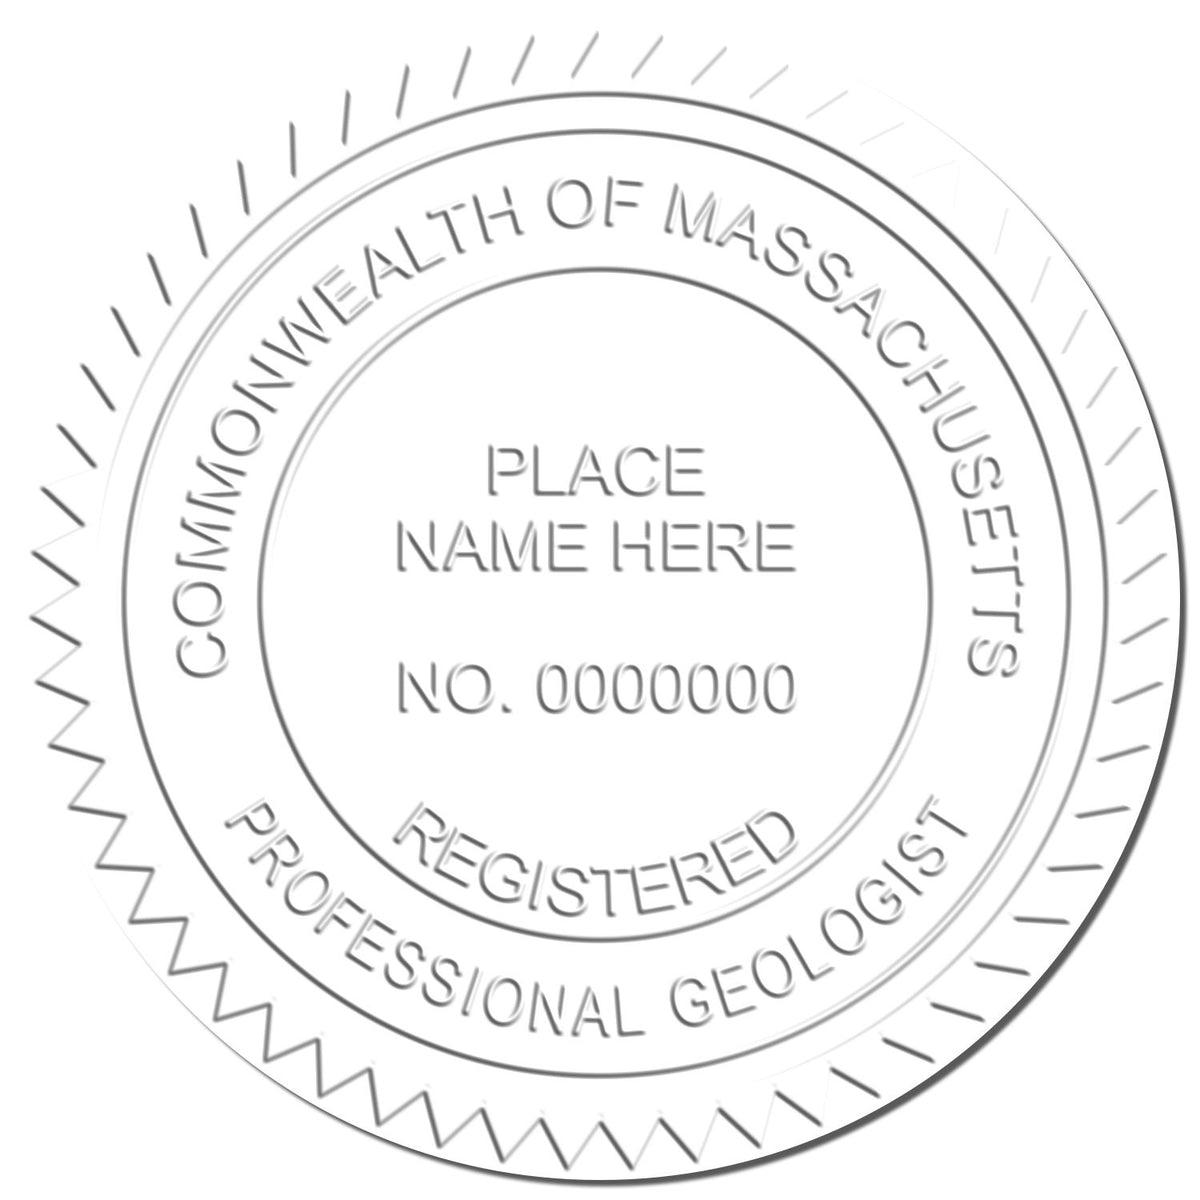 The Massachusetts Geologist Desk Seal stamp impression comes to life with a crisp, detailed image stamped on paper - showcasing true professional quality.